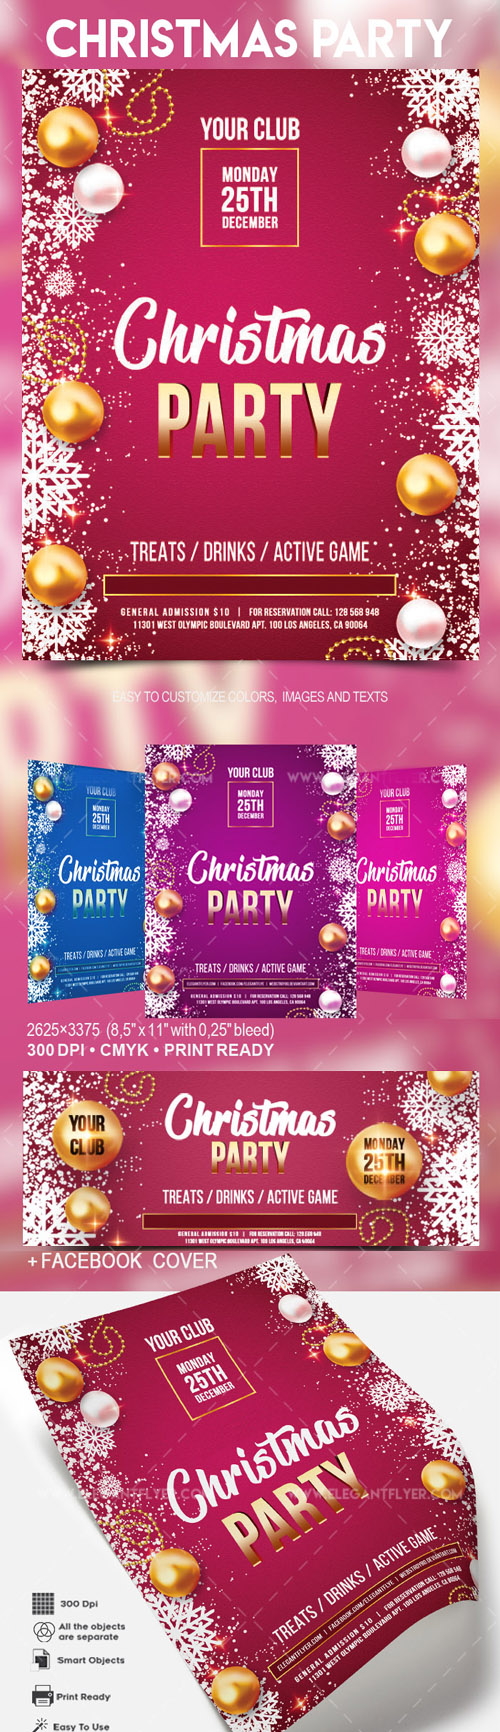 Christmas Party Flyer PSD Templates (+ Fb Cover)